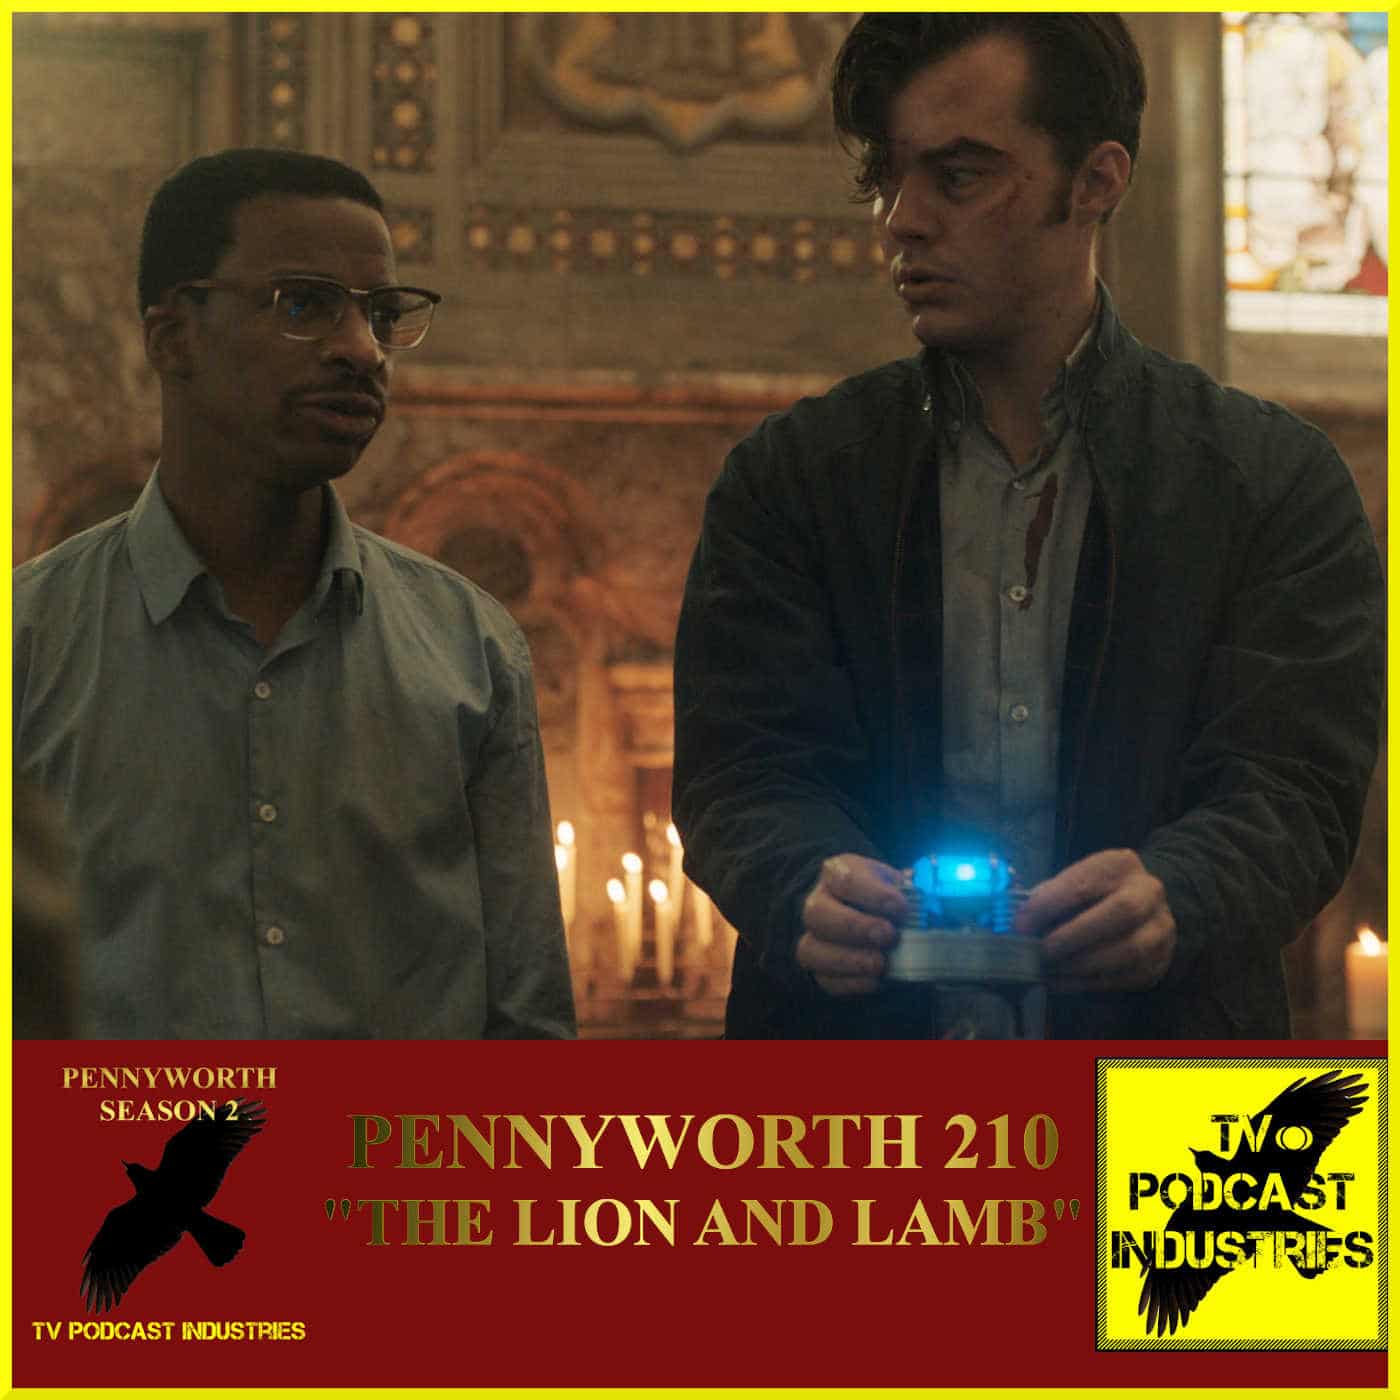 Pennyworth Season 2 Episode 10 "The Lion and Lamb" Podcast by TV Podcast Industries